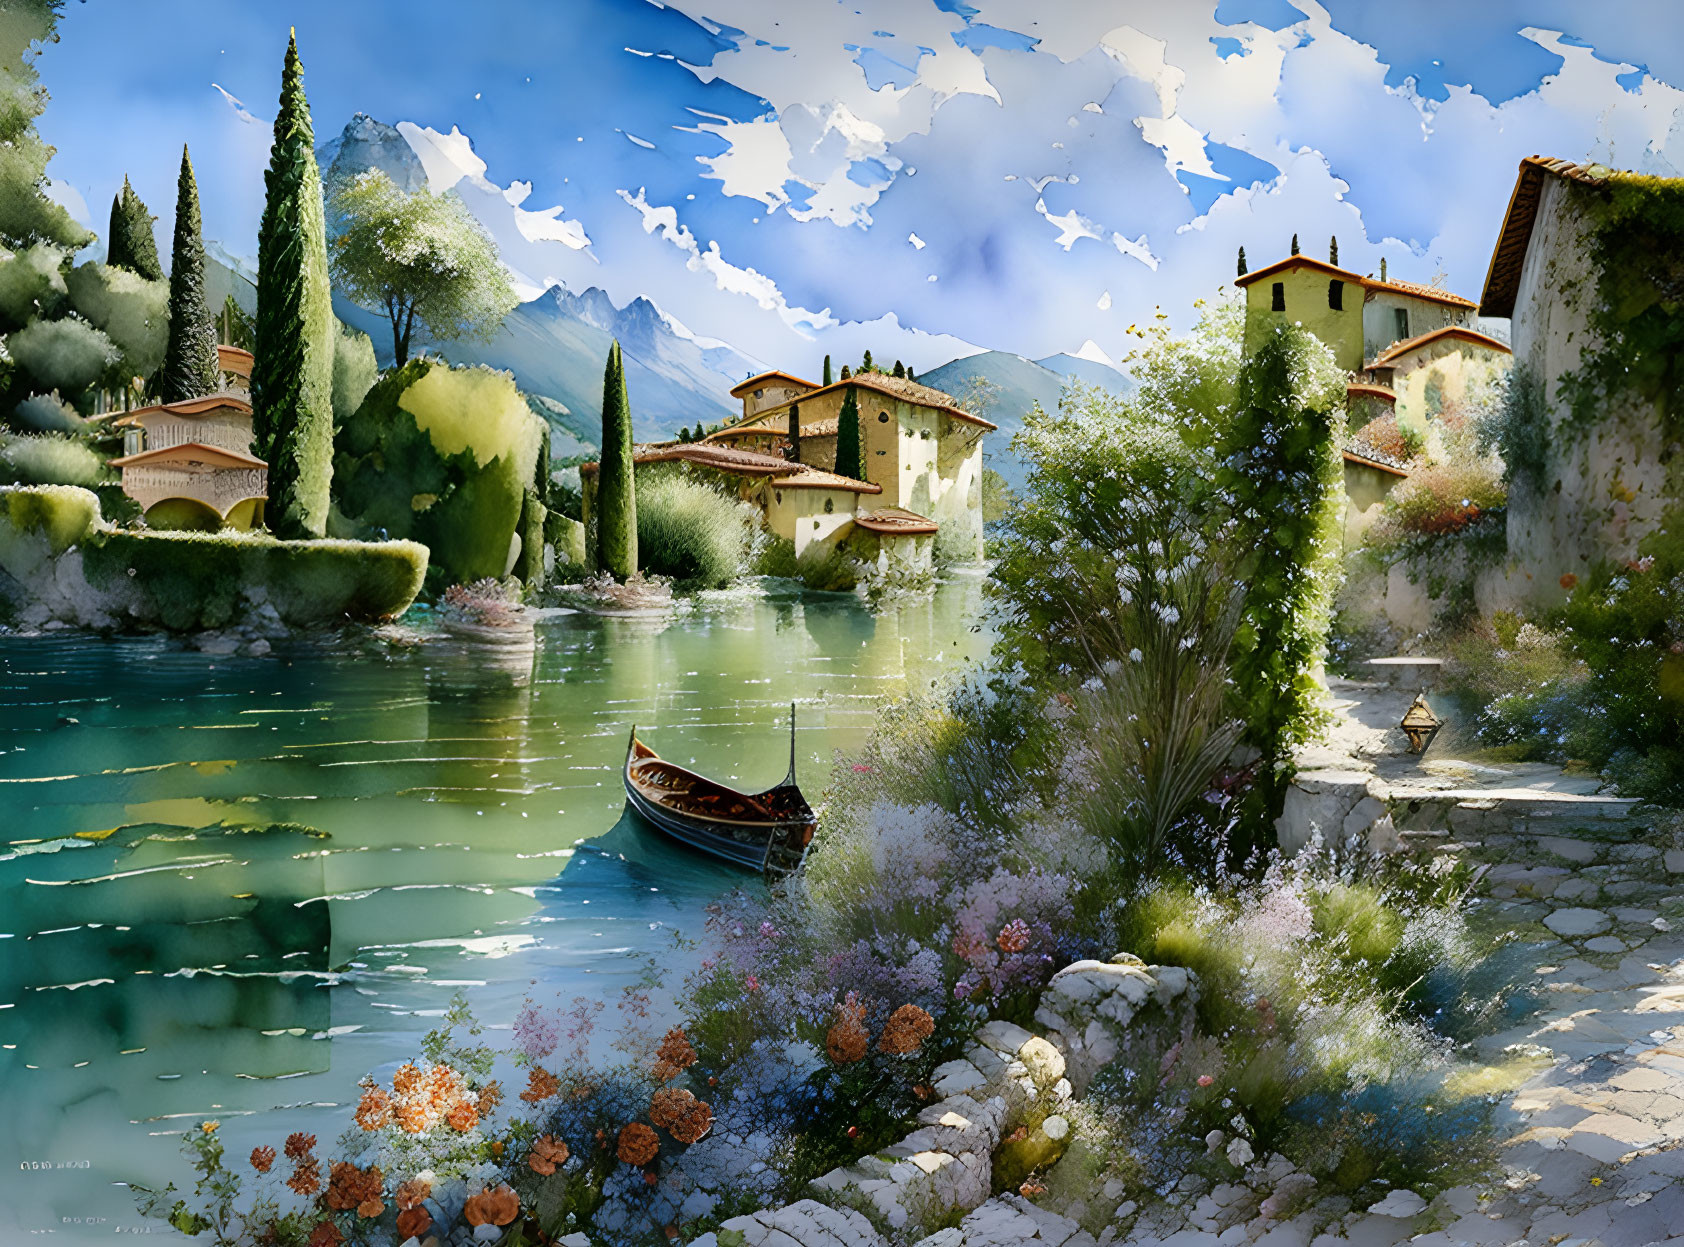 Tranquil Italian lakeside village with flowers, boat, mountains, and cloudy sky